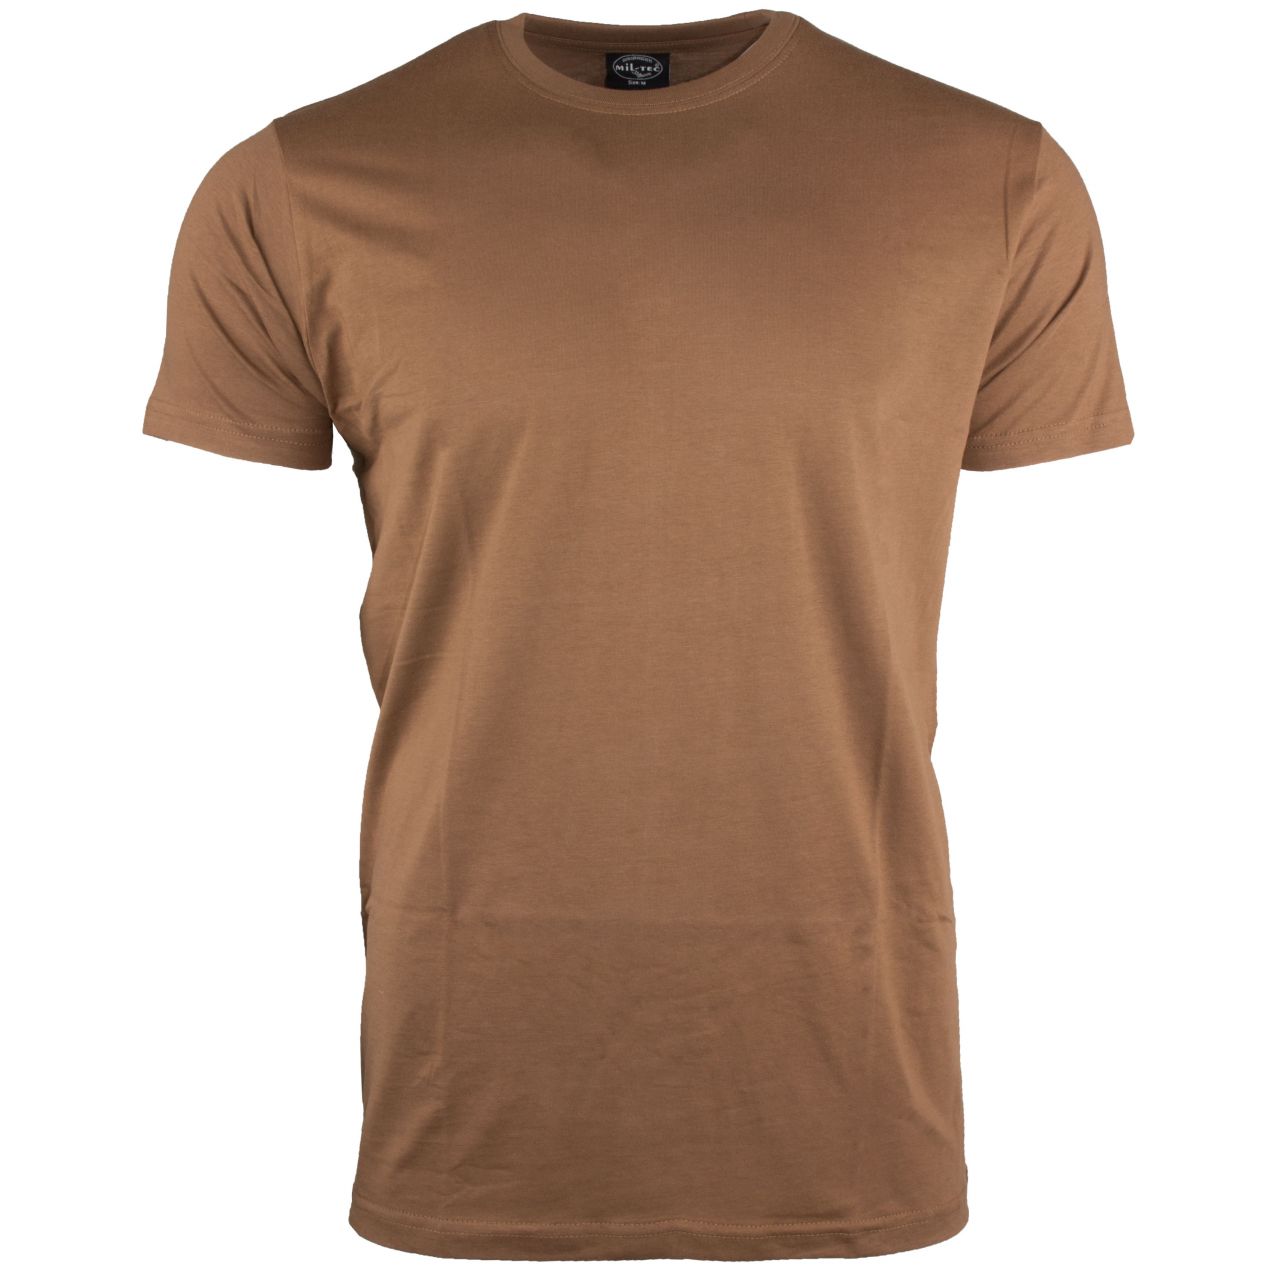 Purchase the T-Shirt olive green by ASMC